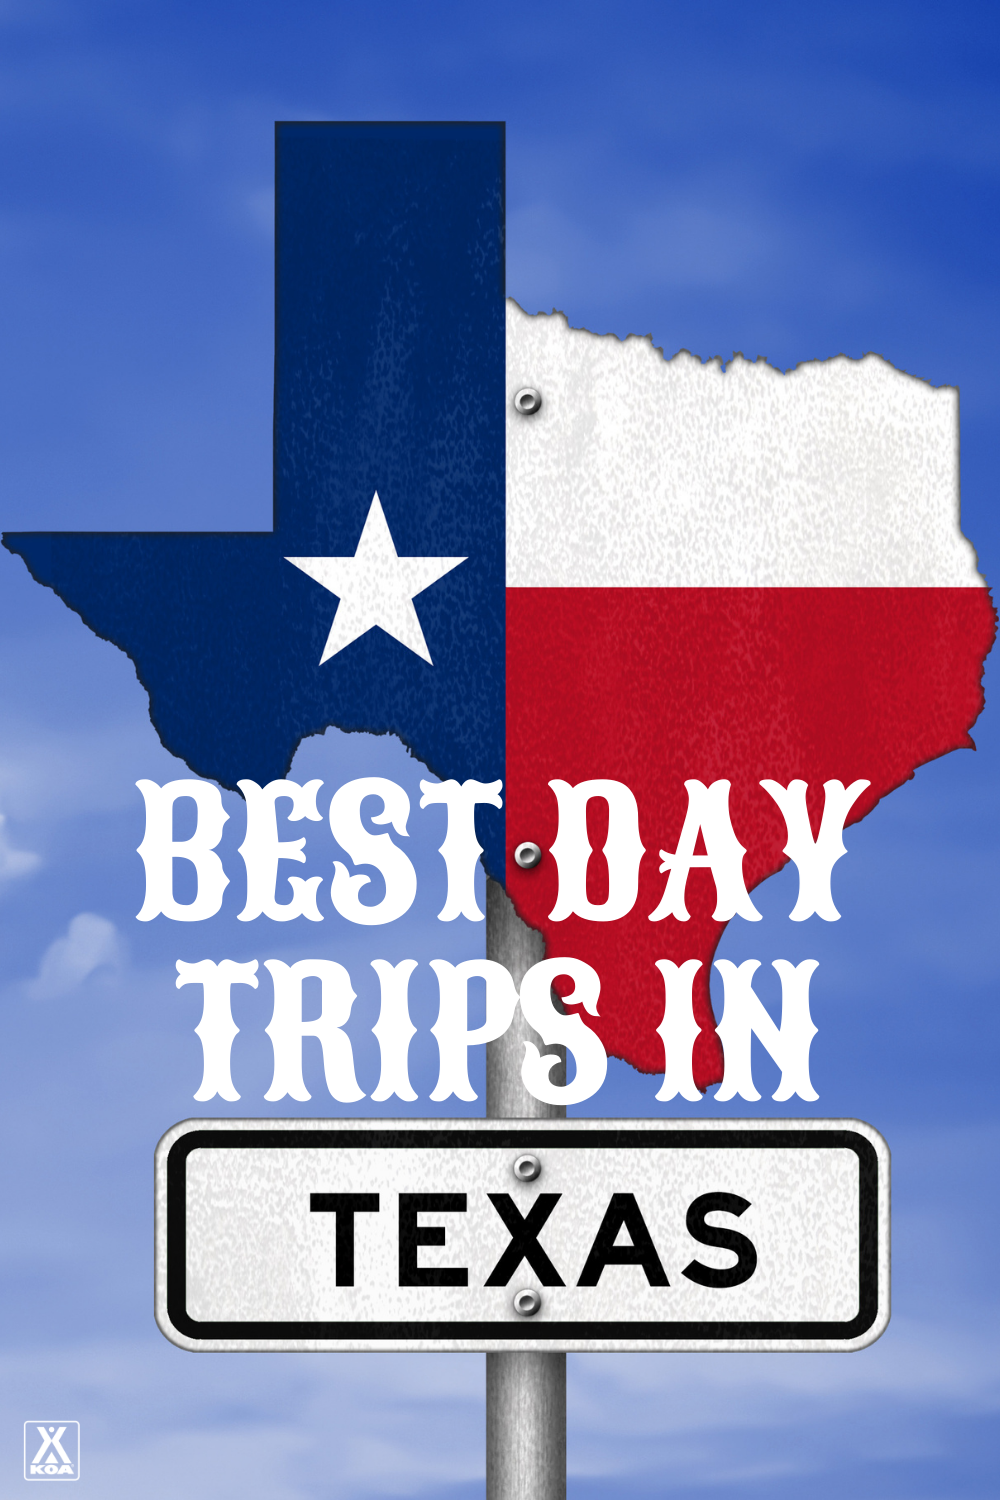 Looking to get away for a day in Texas? Check out these 10 fun day trip ideas in Texas & start planning your adventure today!